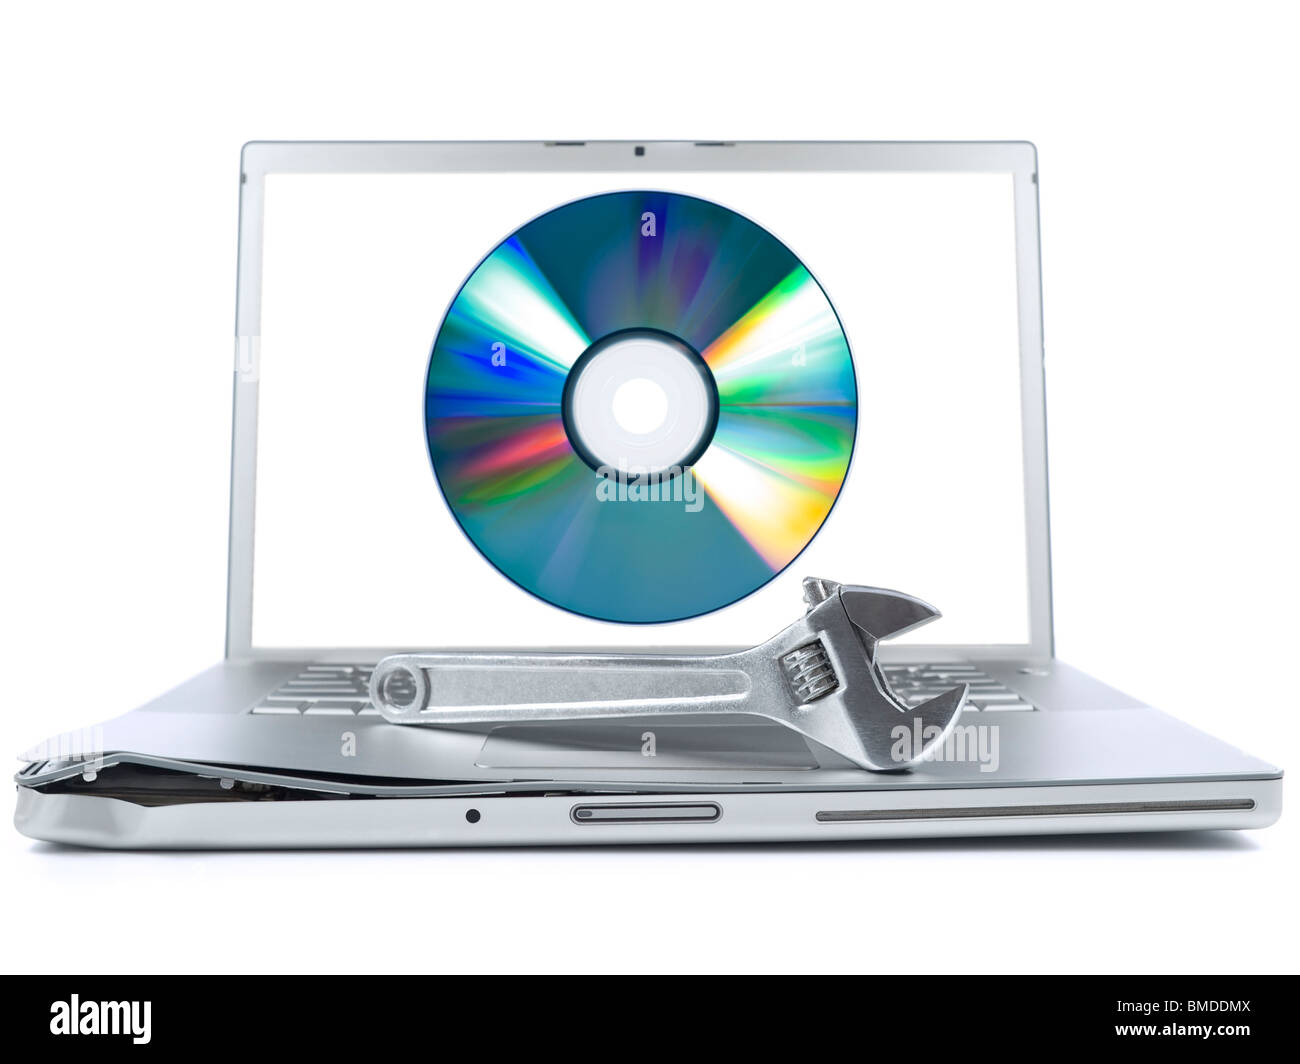 Damaged laptop with a spanner over it and a digital disc on the screen. Isolated on white. Stock Photo